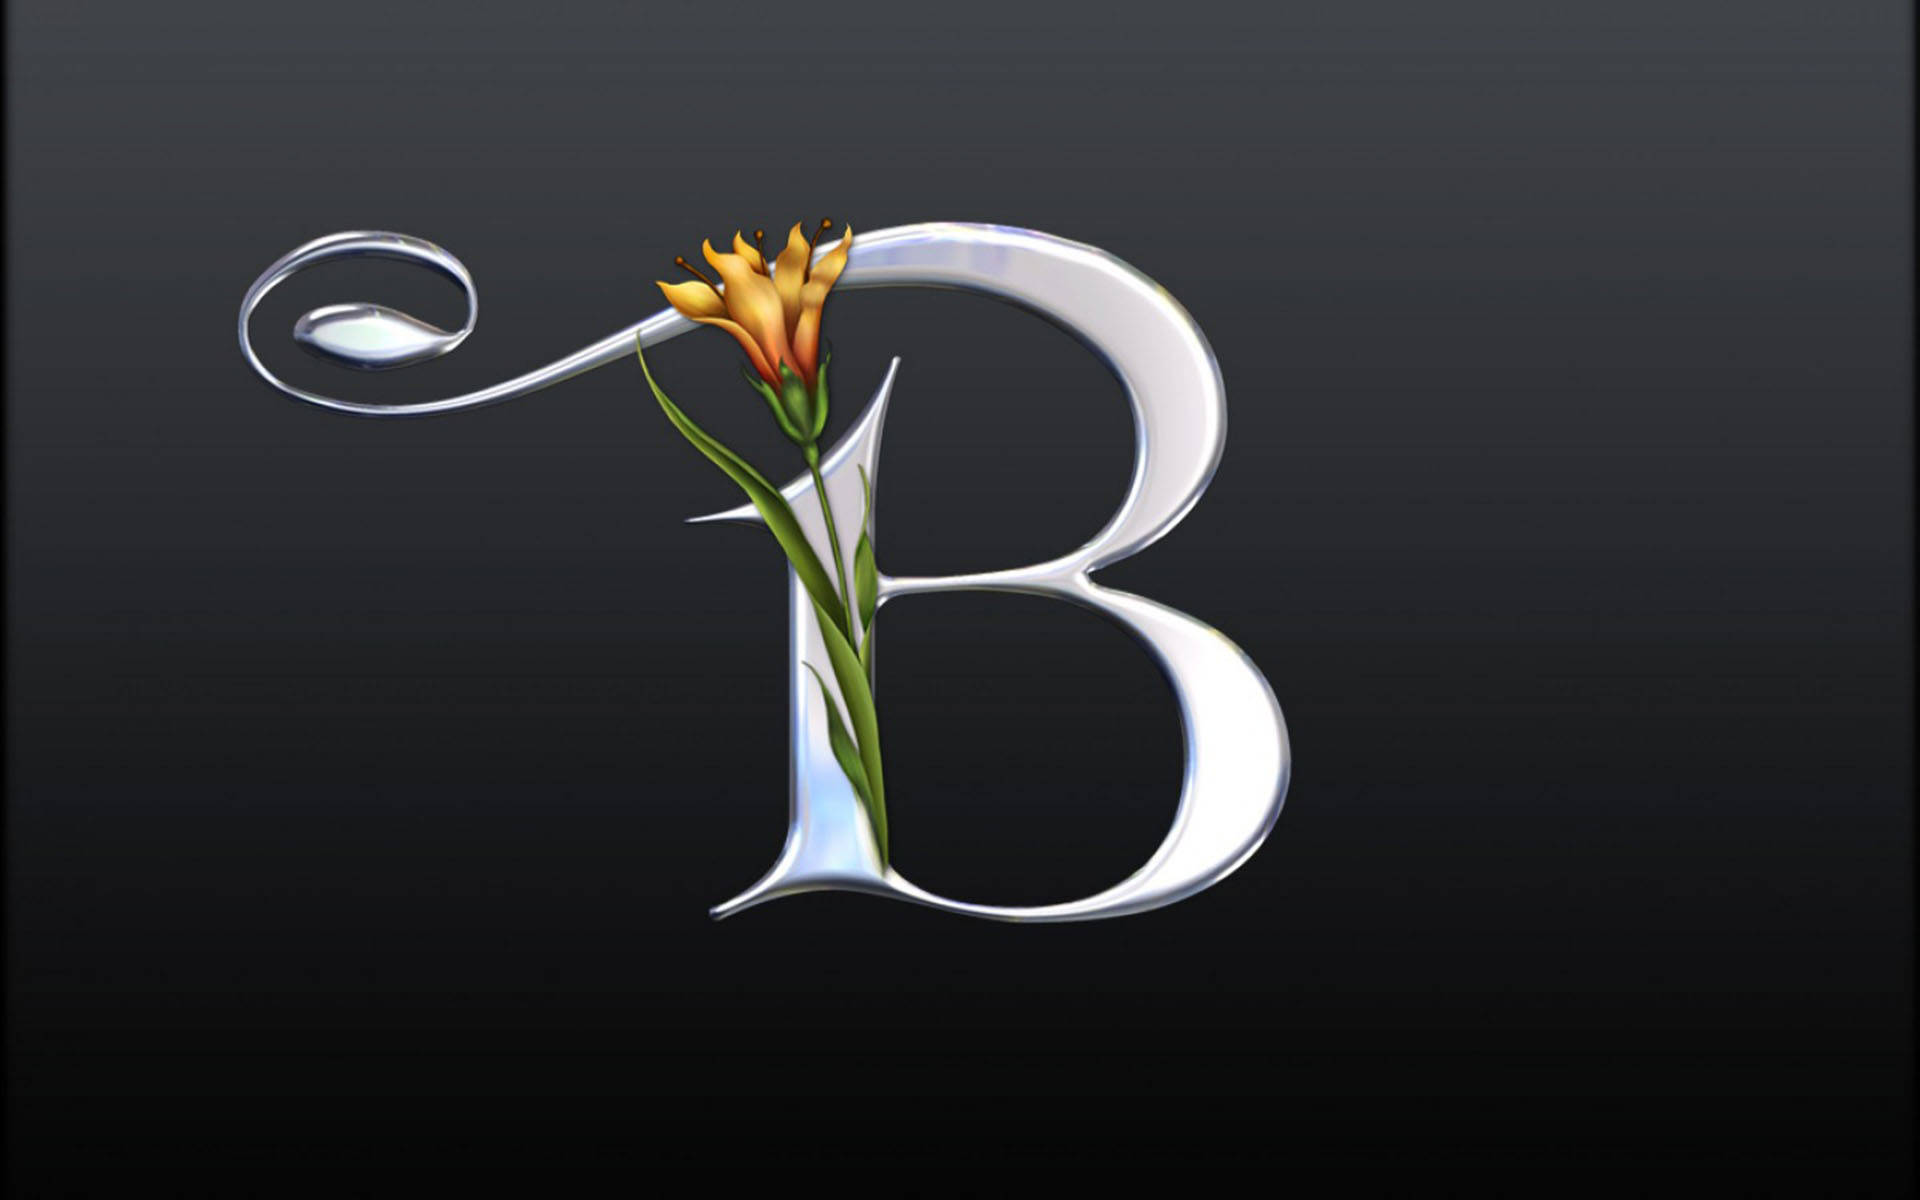 Silver Plated Letter B Background